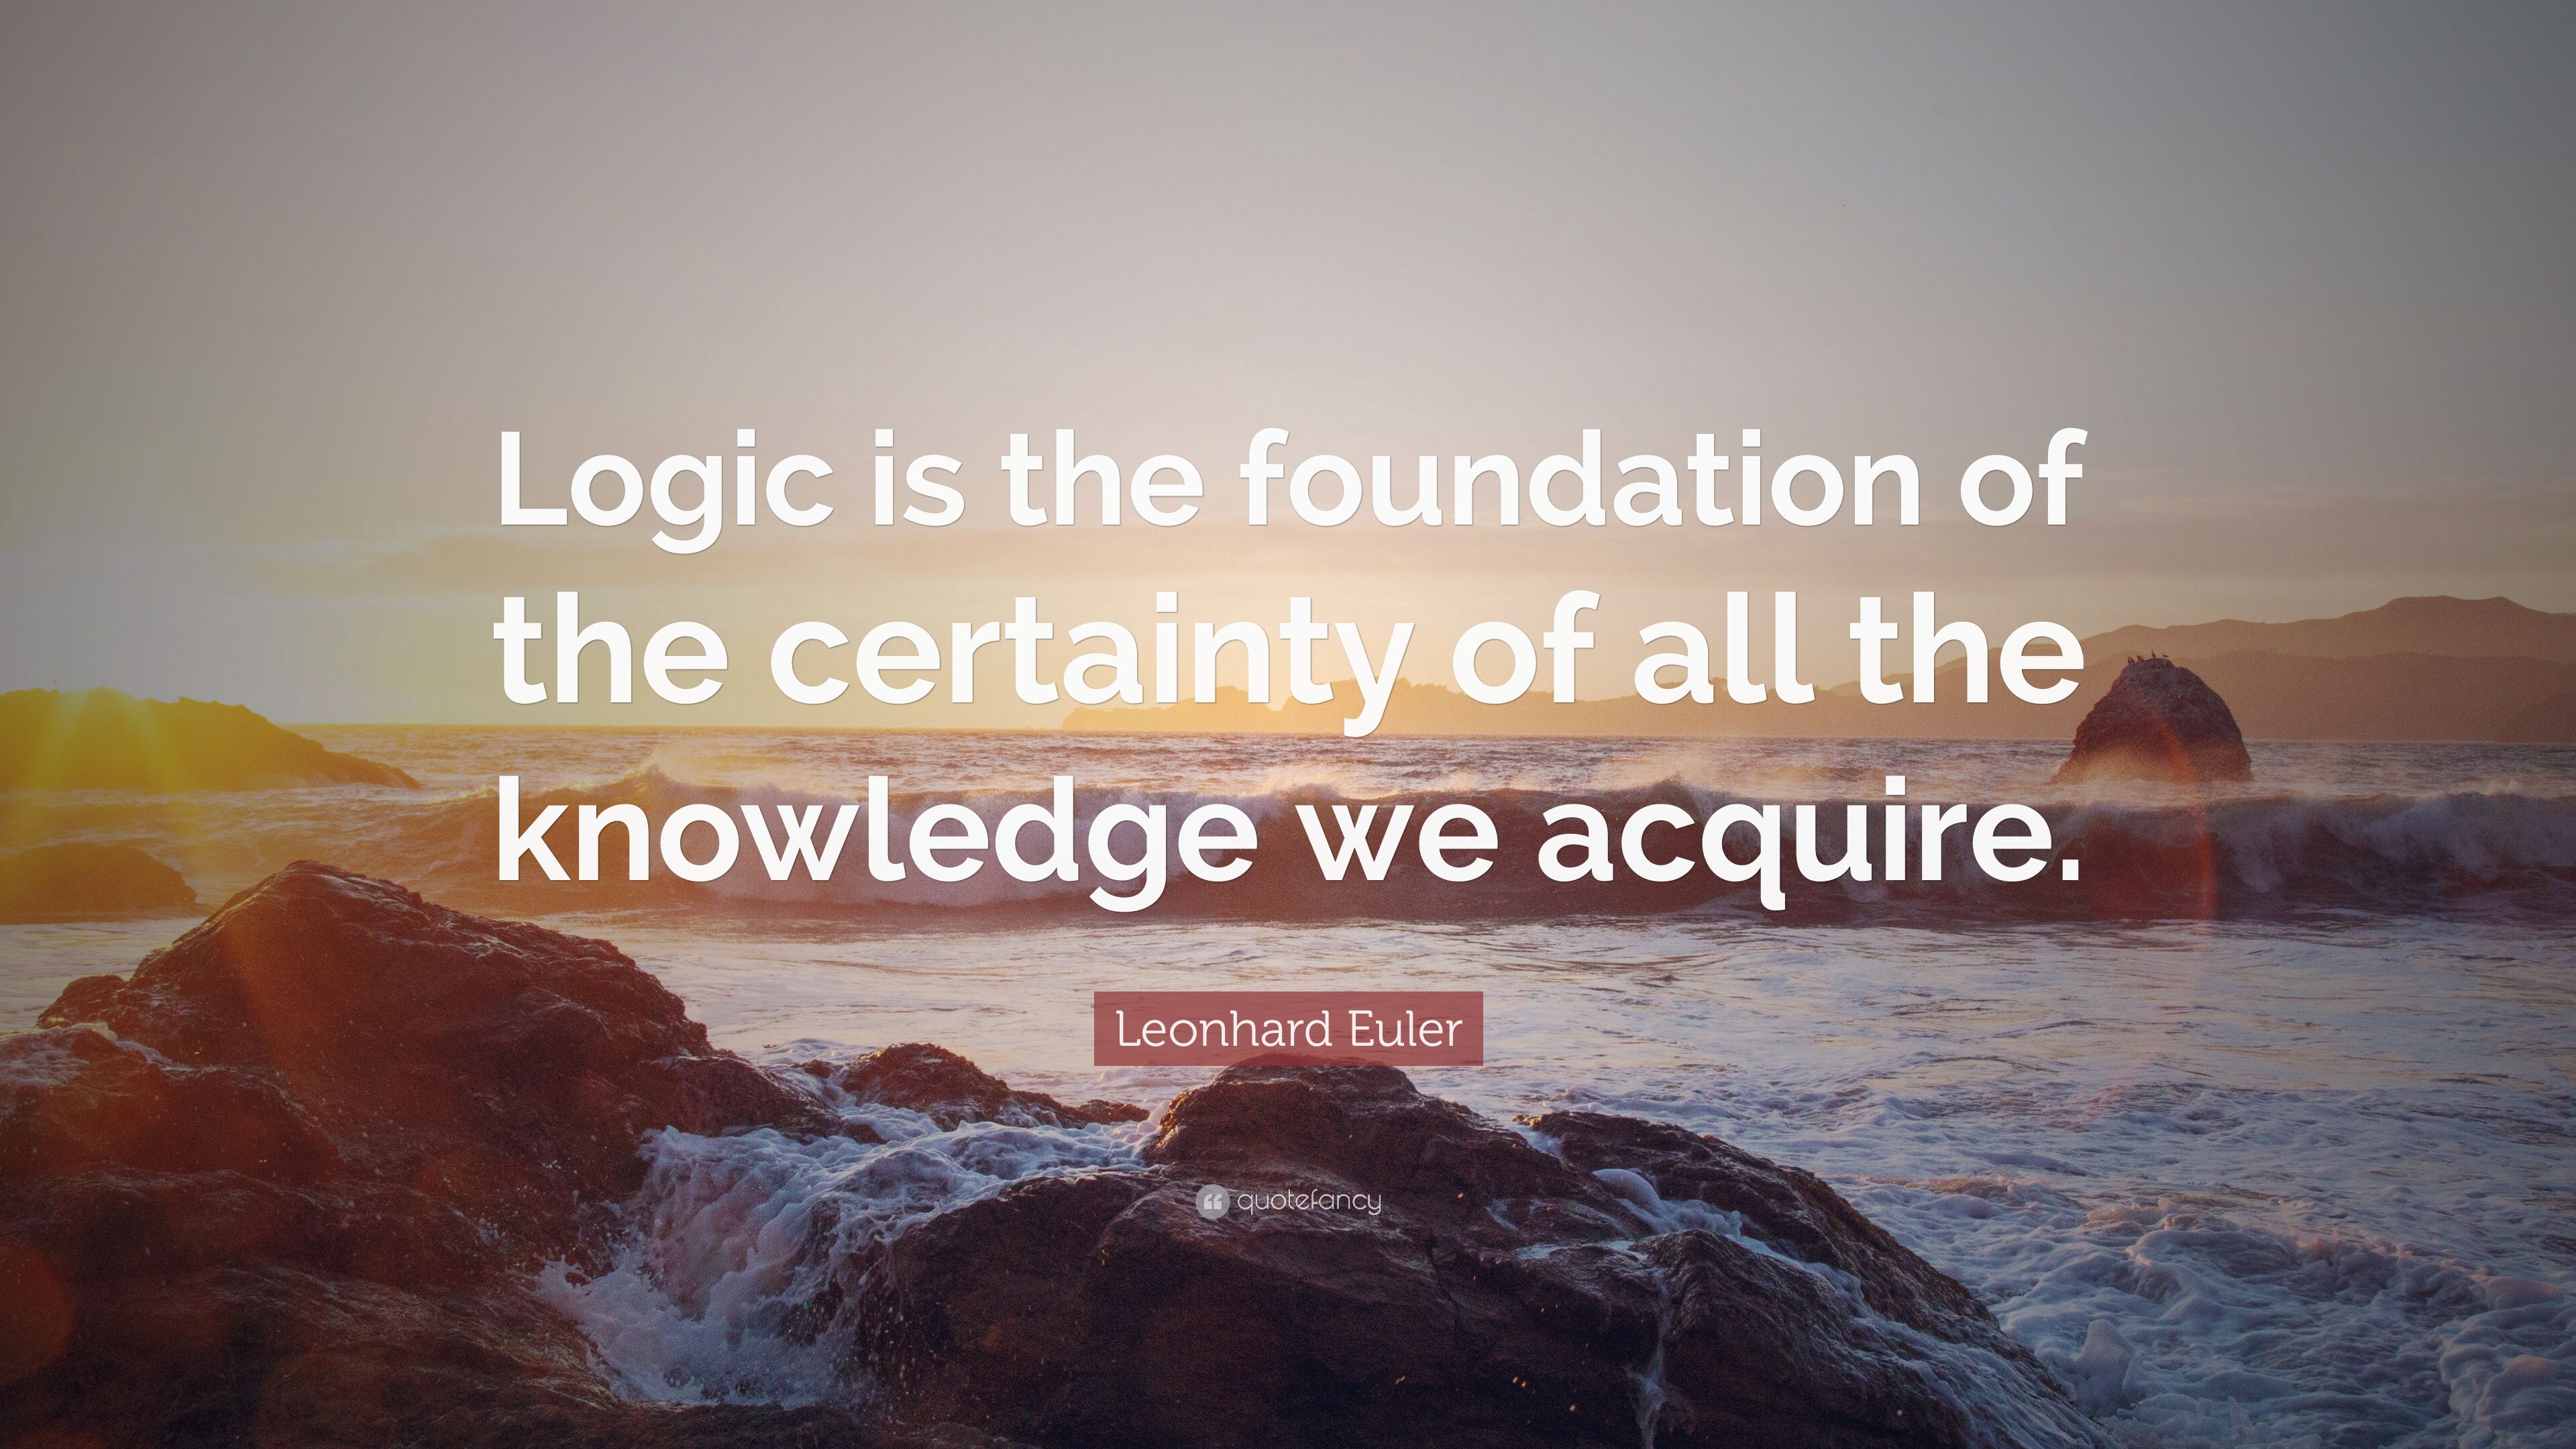 Leonhard Euler Quote: “Logic is the foundation of the certainty of all the knowledge we acquire.” (7 wallpaper)